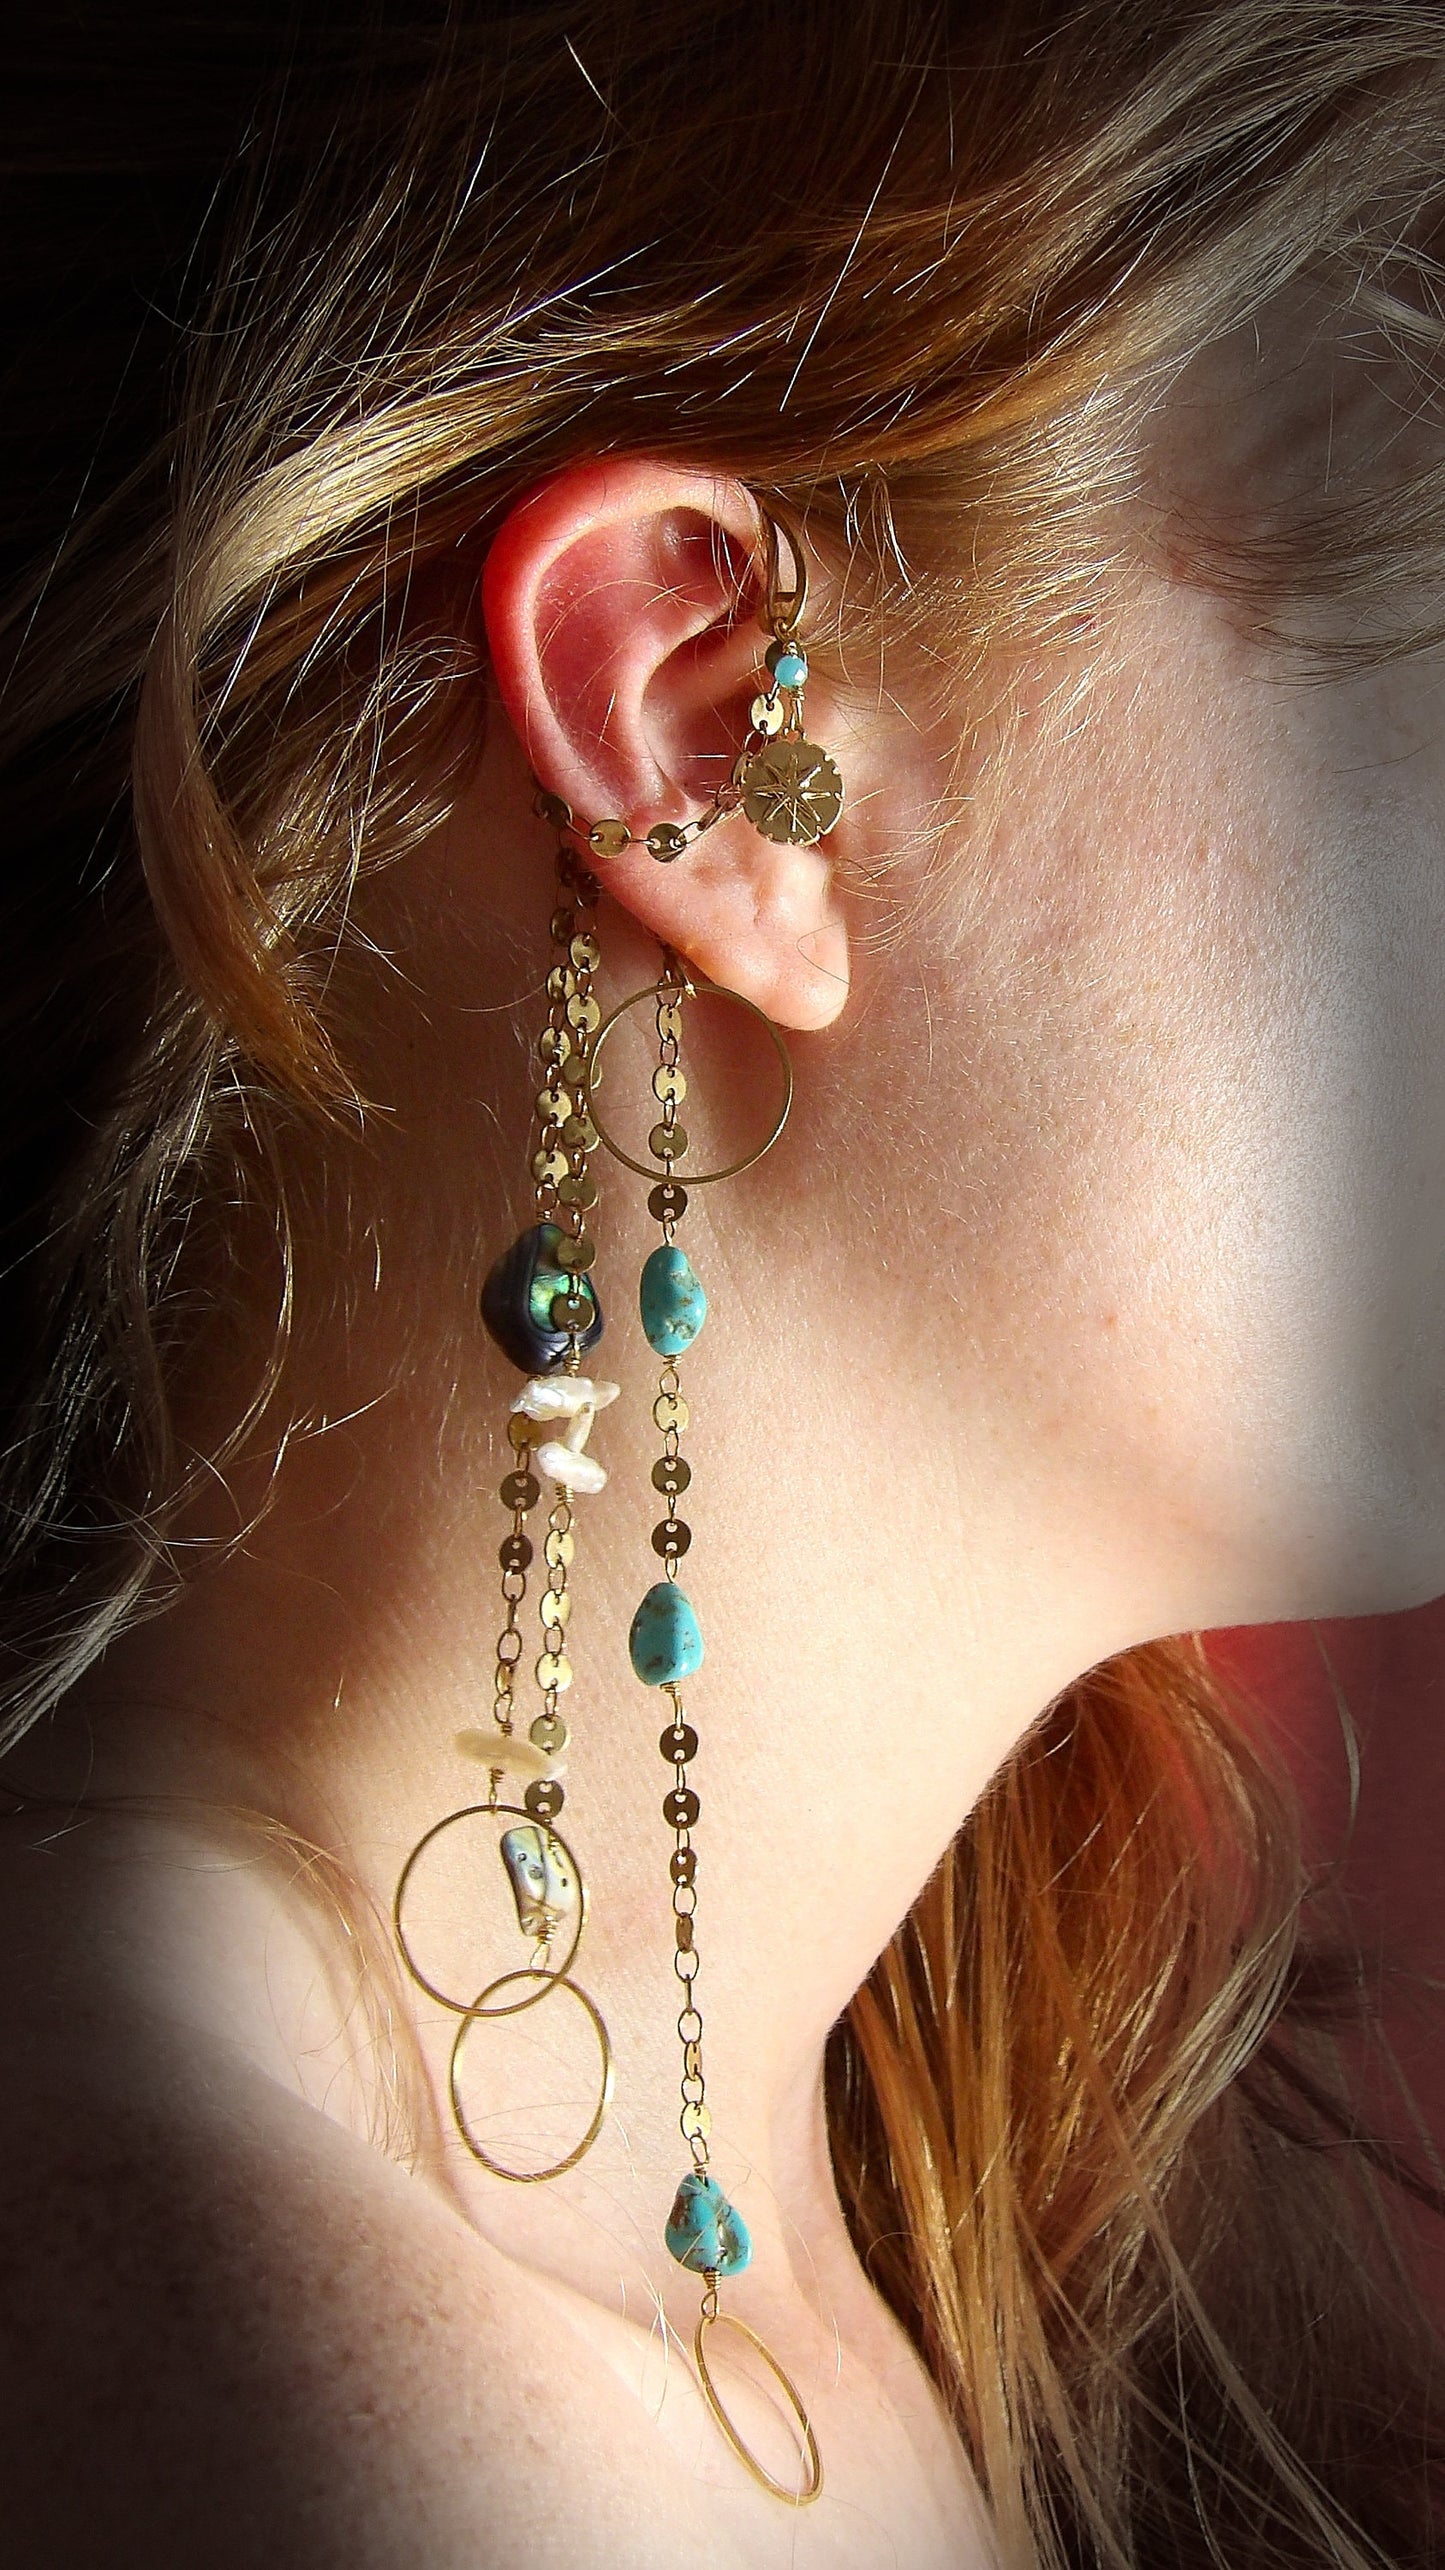 Ear Wrap With Turquoise, Pearl & Abalone | Hippie Jewelry | Sirencore Ear Cuff With Chains | Whimsigoth Bohemian Jewelry | Gift For Her